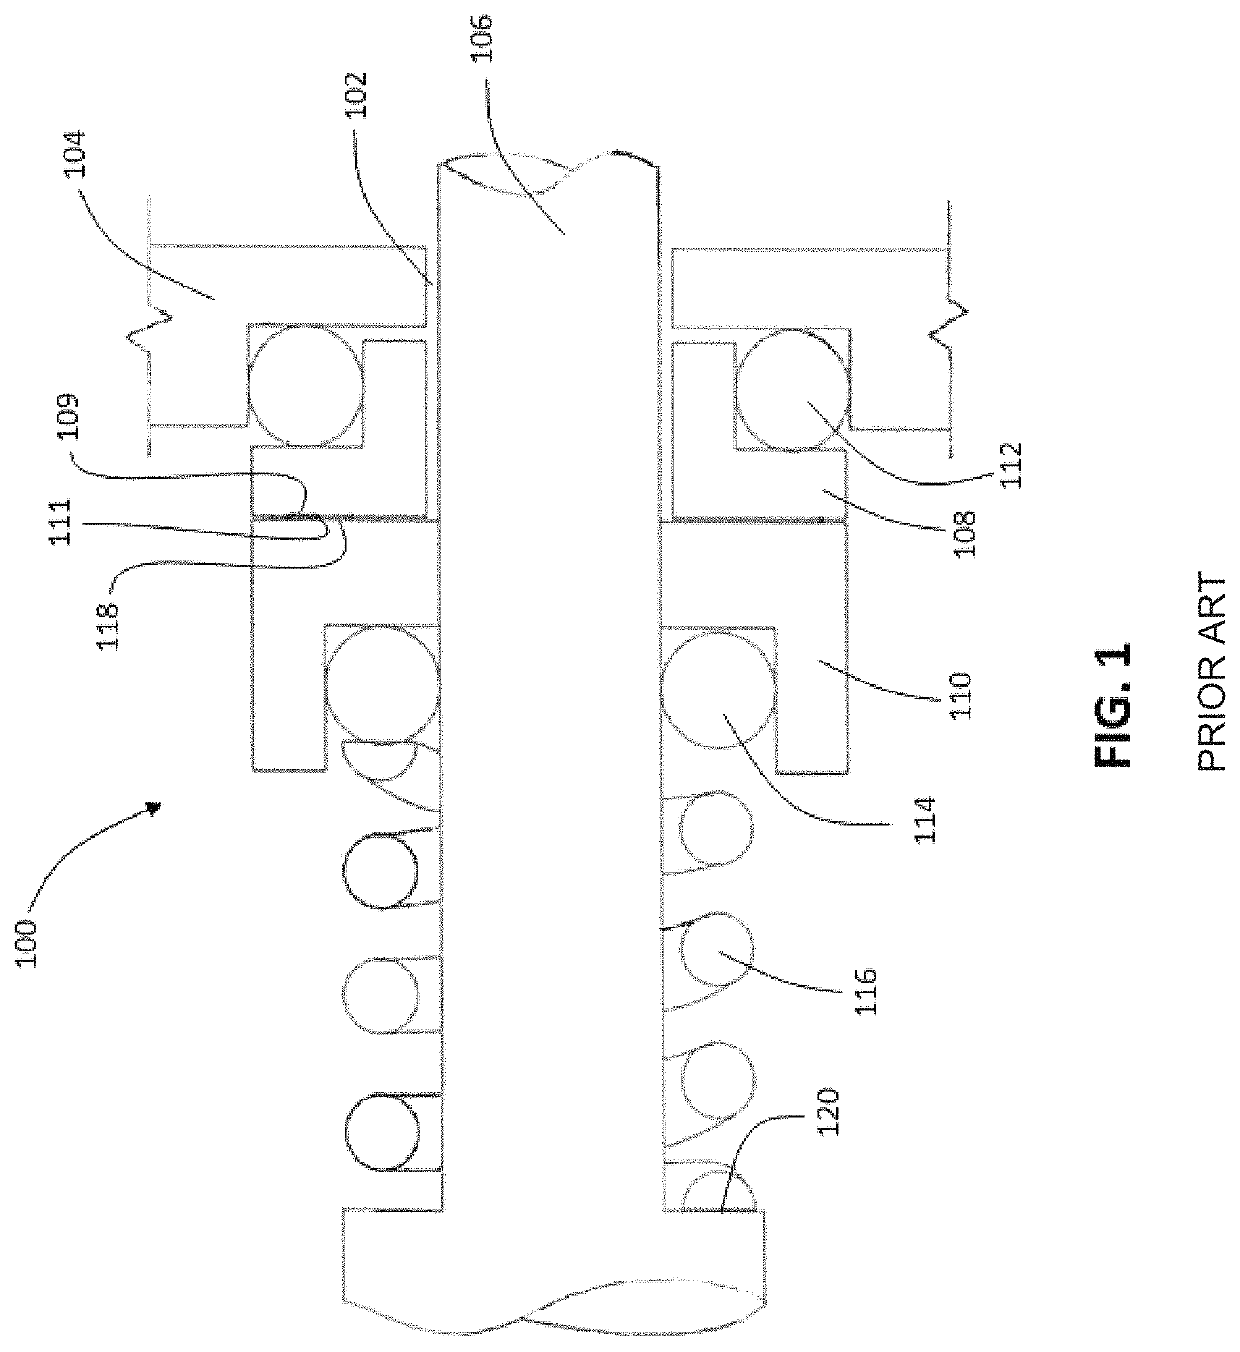 Systems and methods for predictive diagnostics for mechanical systems